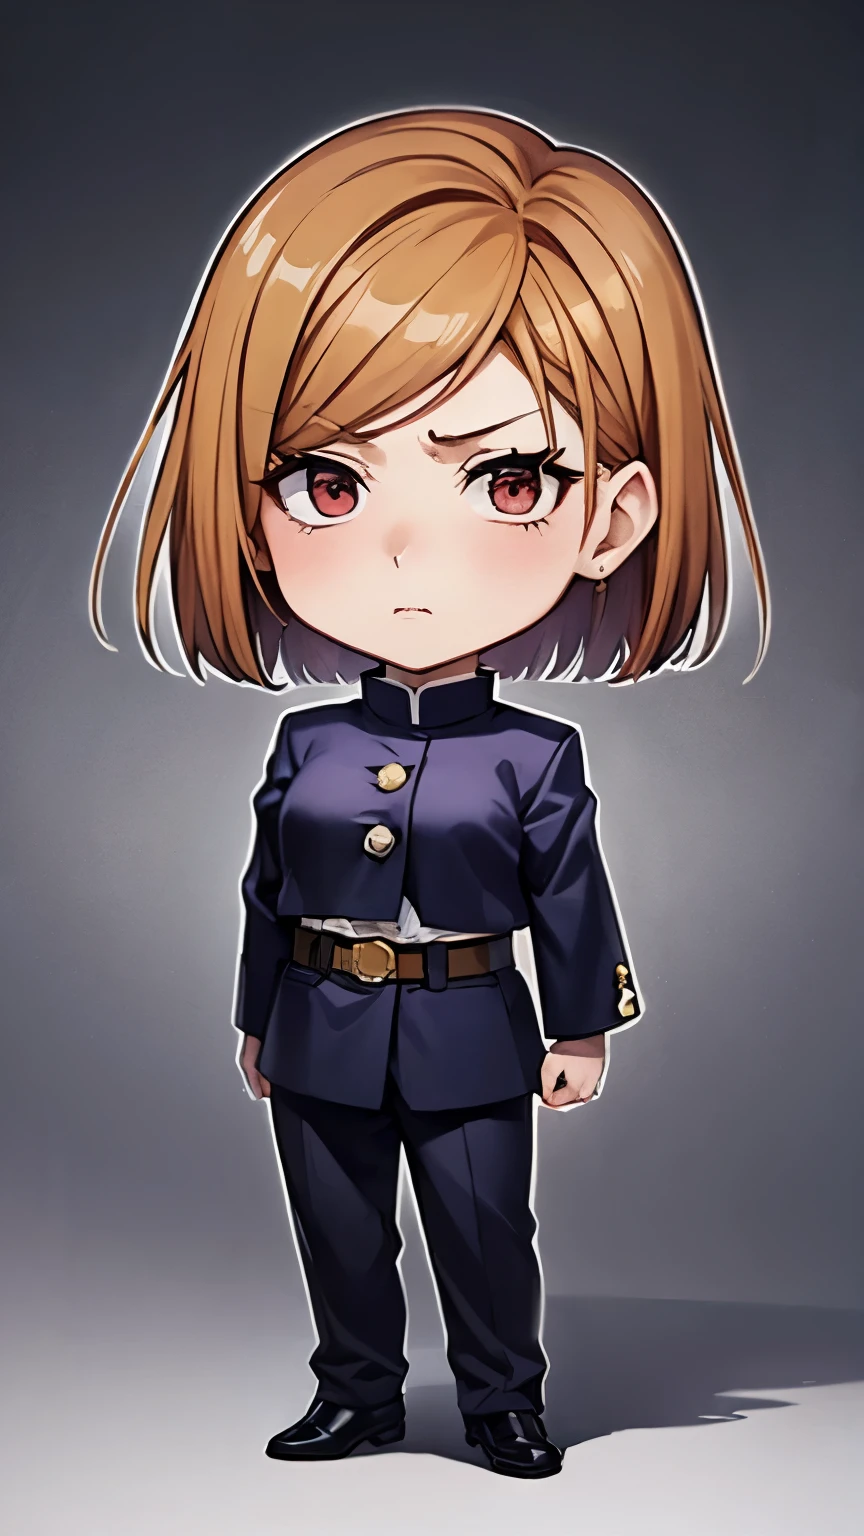 Chibi character pixel art, ((nobara kugisaki)), 1 girl with short brown hair standing, Chibi style, high quality pixel art, Gege Akutami, photography, beautiful, colorful,realistic, masterpieces, top quality, best quality, official art, beautiful and aesthetic.